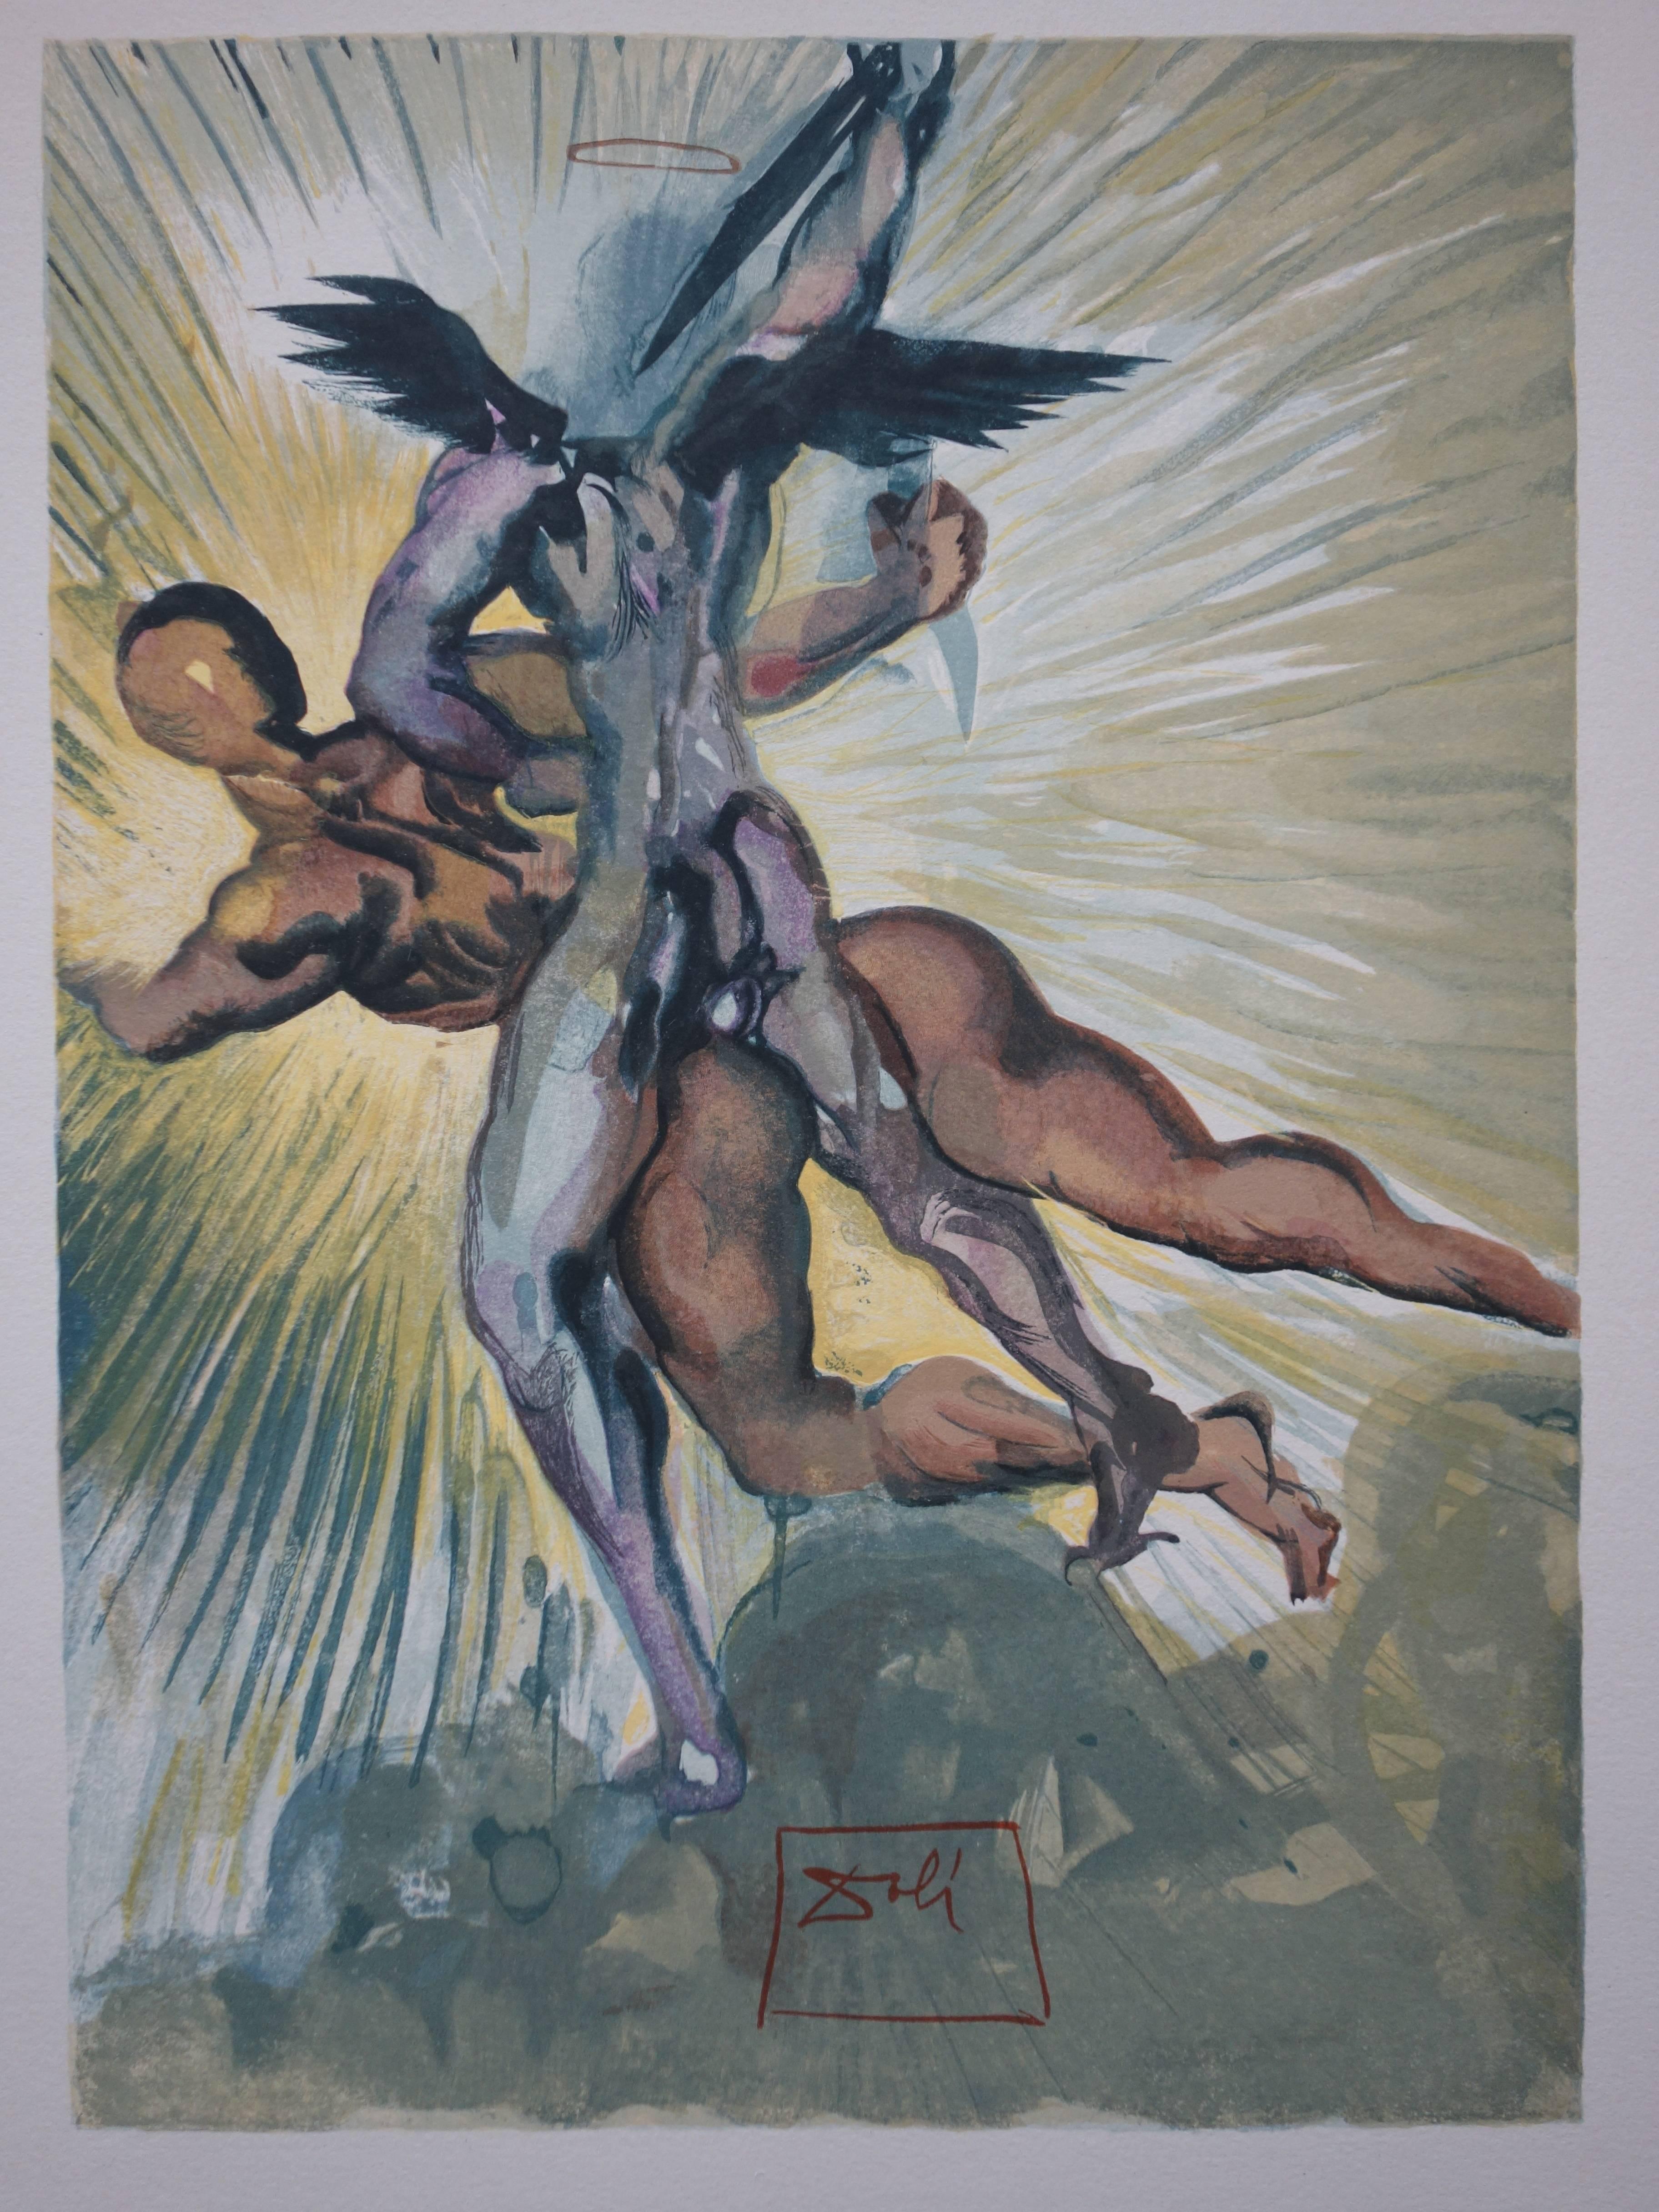 Purgatory 8 - The Guardian Angels of the Valley - Original woodcut - 1963 - Gray Figurative Print by Salvador Dalí